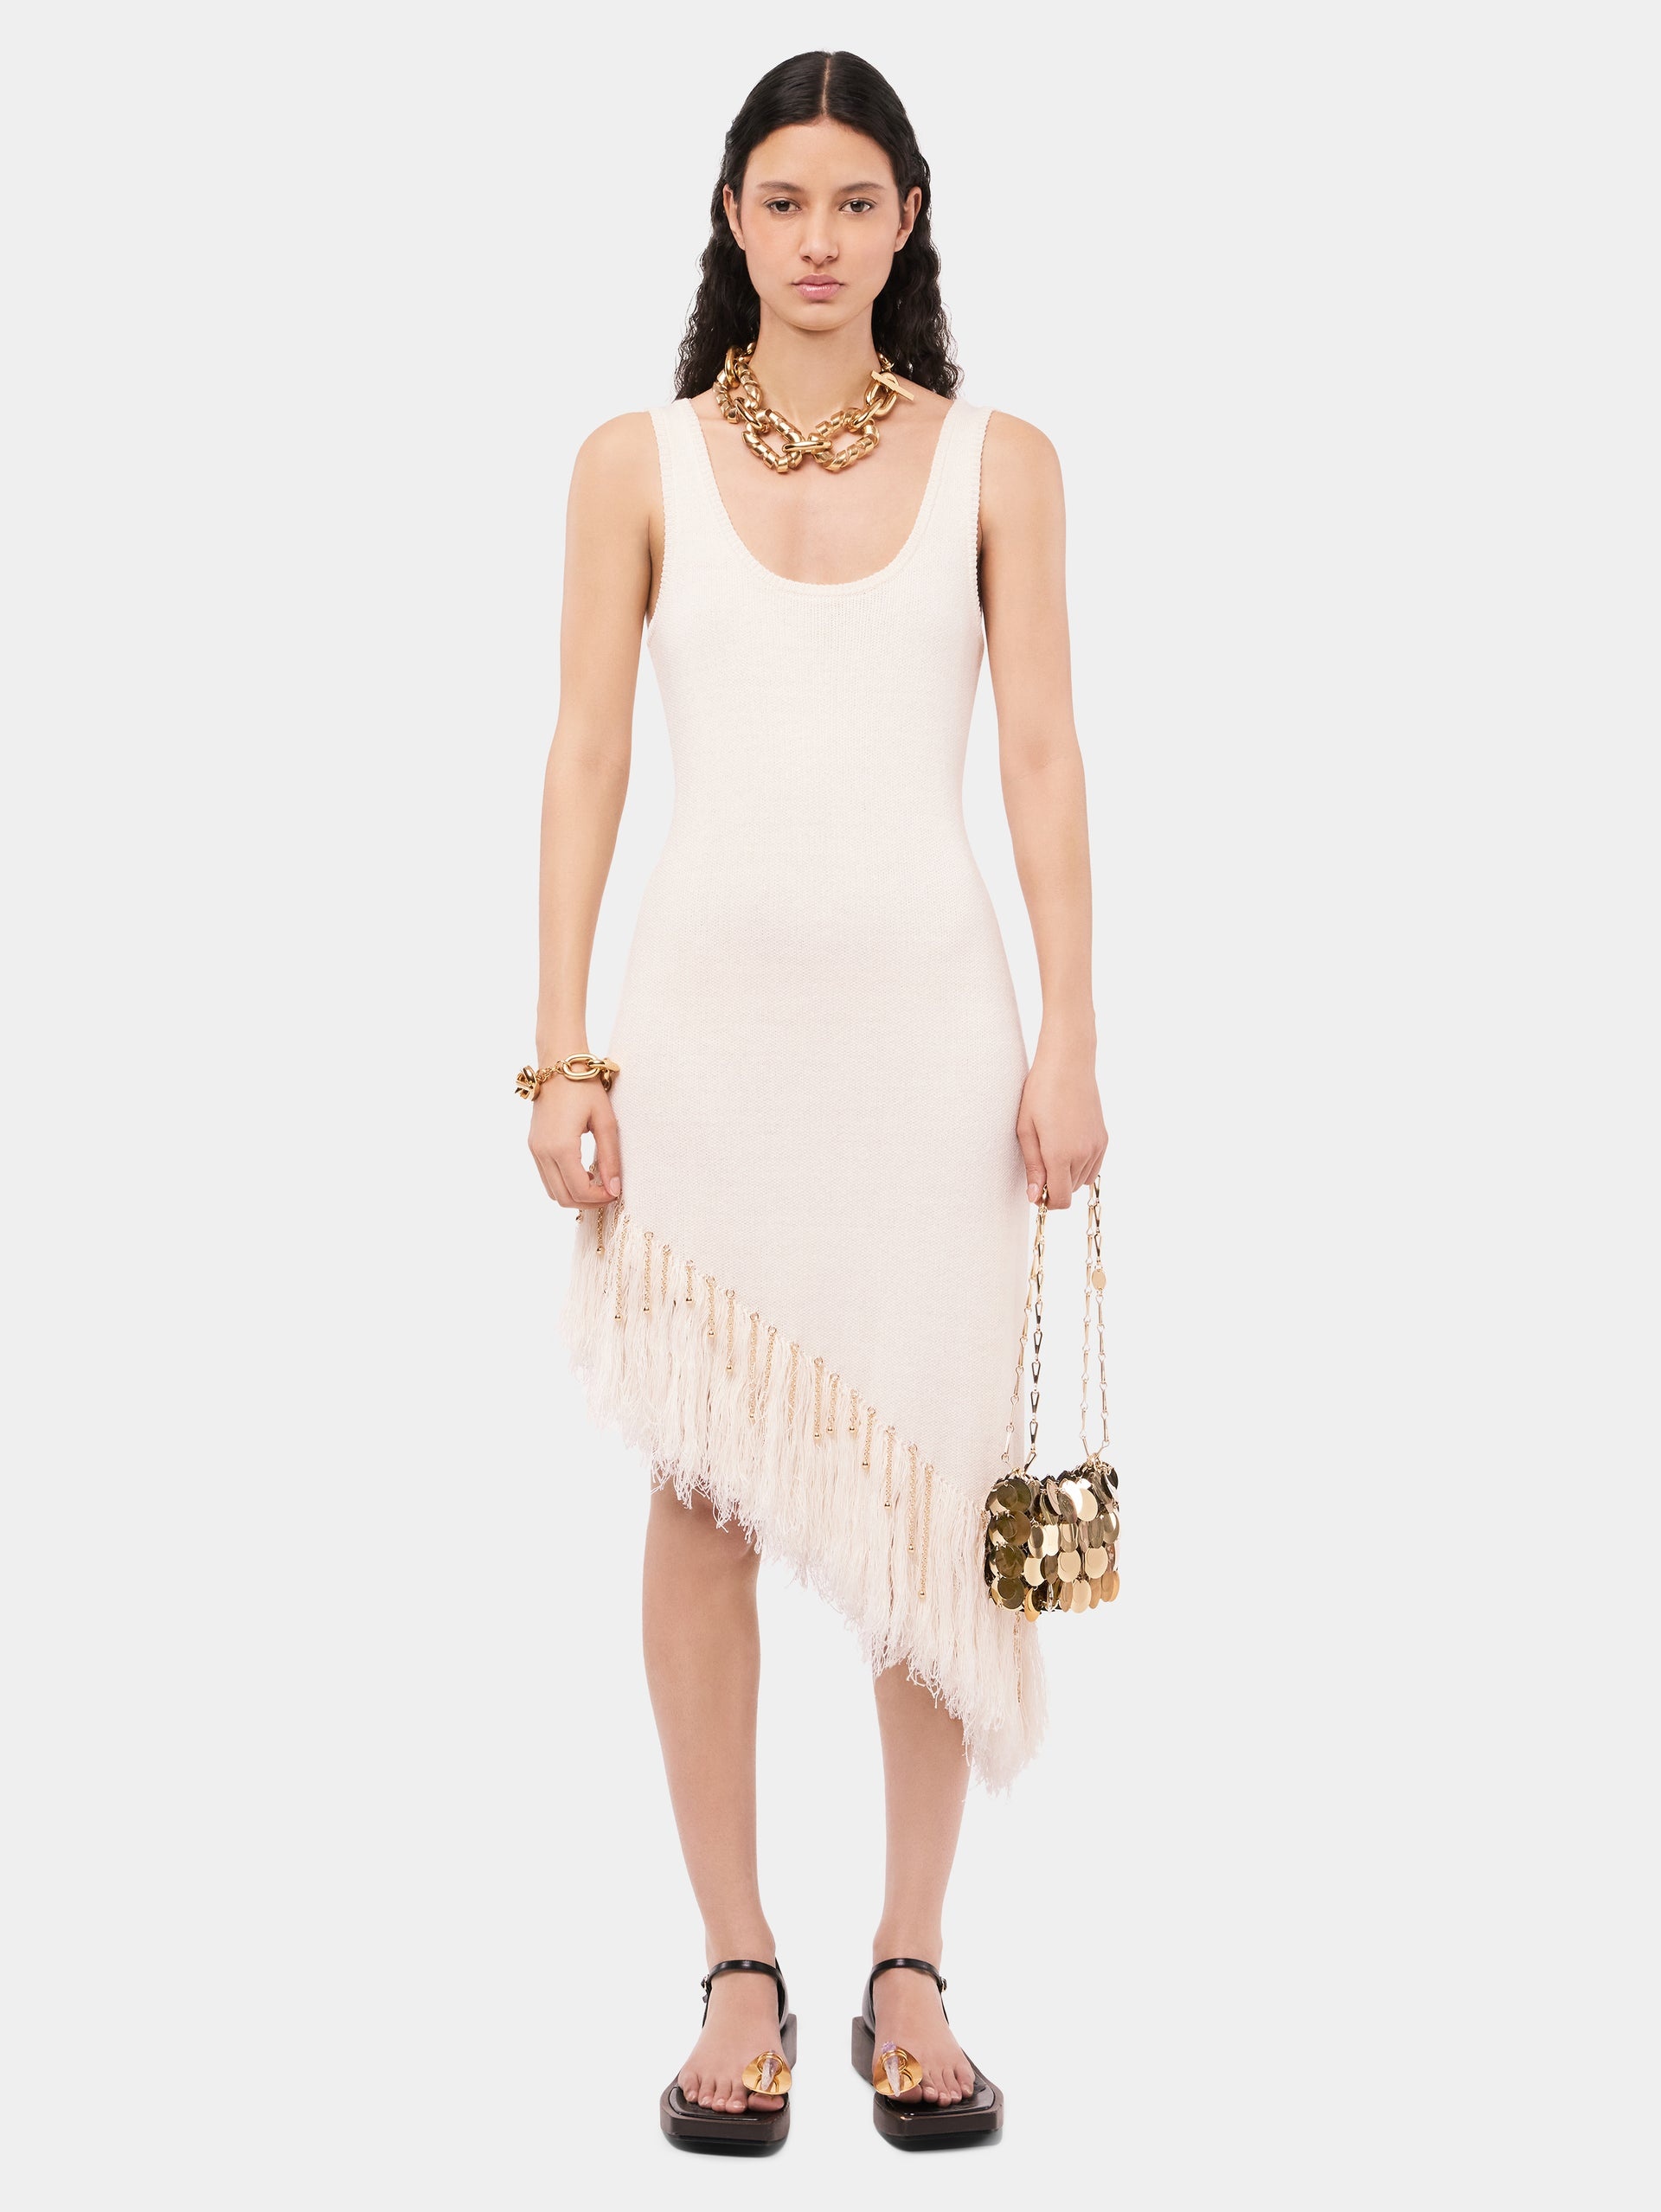 ASYMMETRICAL OFF WHITE WOVEN DRESS WITH KNITTED BEADS AND FEATHERS - 2